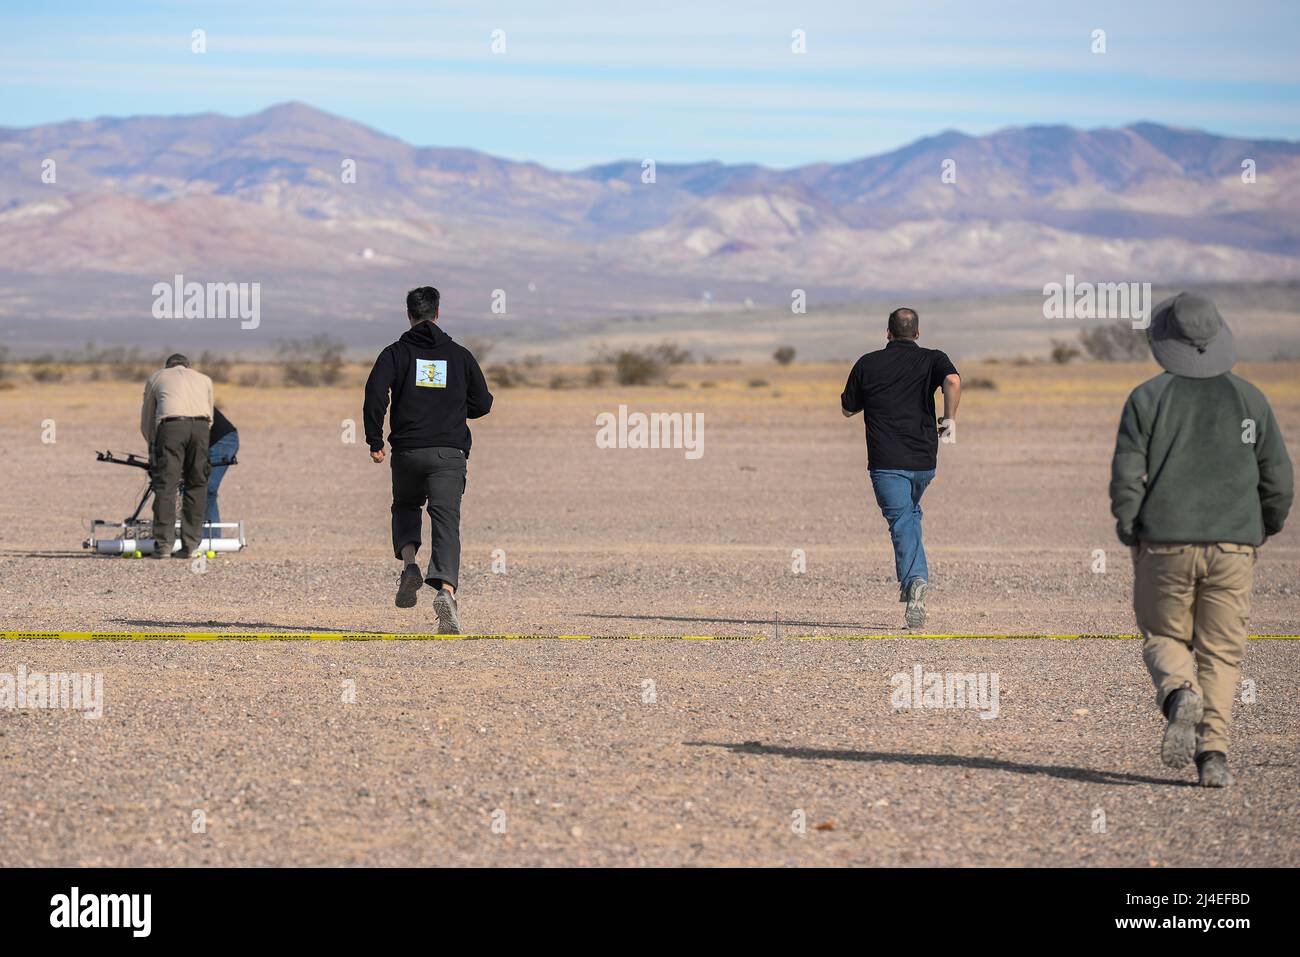 Members of team Flying Gatorz from Wright-Patterson Air Force Base, Ohio, rush to reset their attack drone between scenarios during the 2016 Air Force Research Laboratory Commanders Challenge at the Nevada National Security Site, Las Vegas, NV., Dec. 13, 2016. Teams were given six months to develop a complete counter-unmanned aerial system to aid in base defense. Wright-Patterson's system uses a camera and laser range finder to detect UAS devices and an attack drone with attached net for interception and retrieval. (U.S. Air Force photo by Wesley Farnsworth) Stock Photo